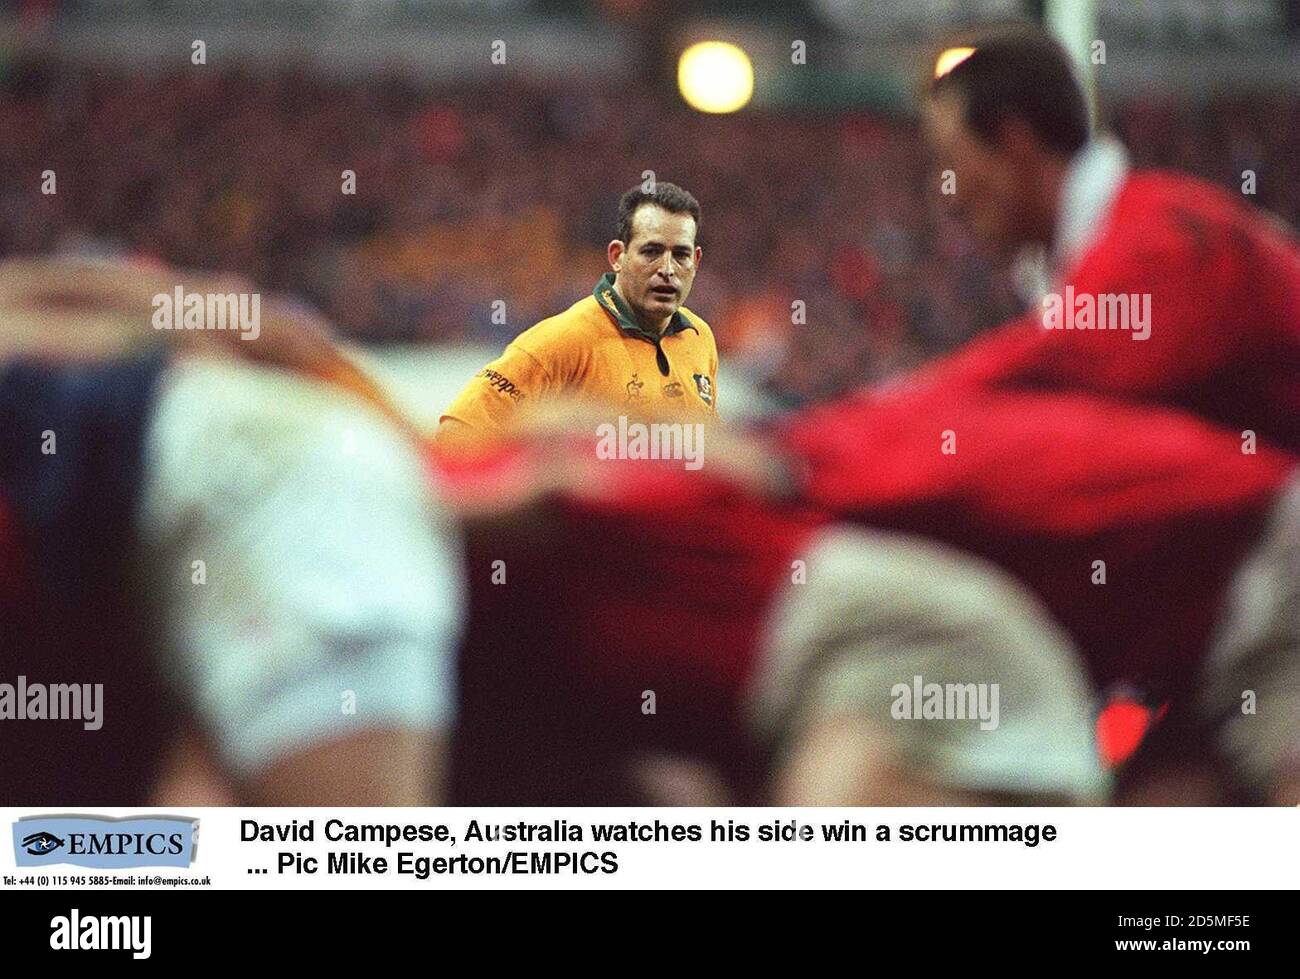 David Campese, Australia watches his side win a scrummage.  Stock Photo